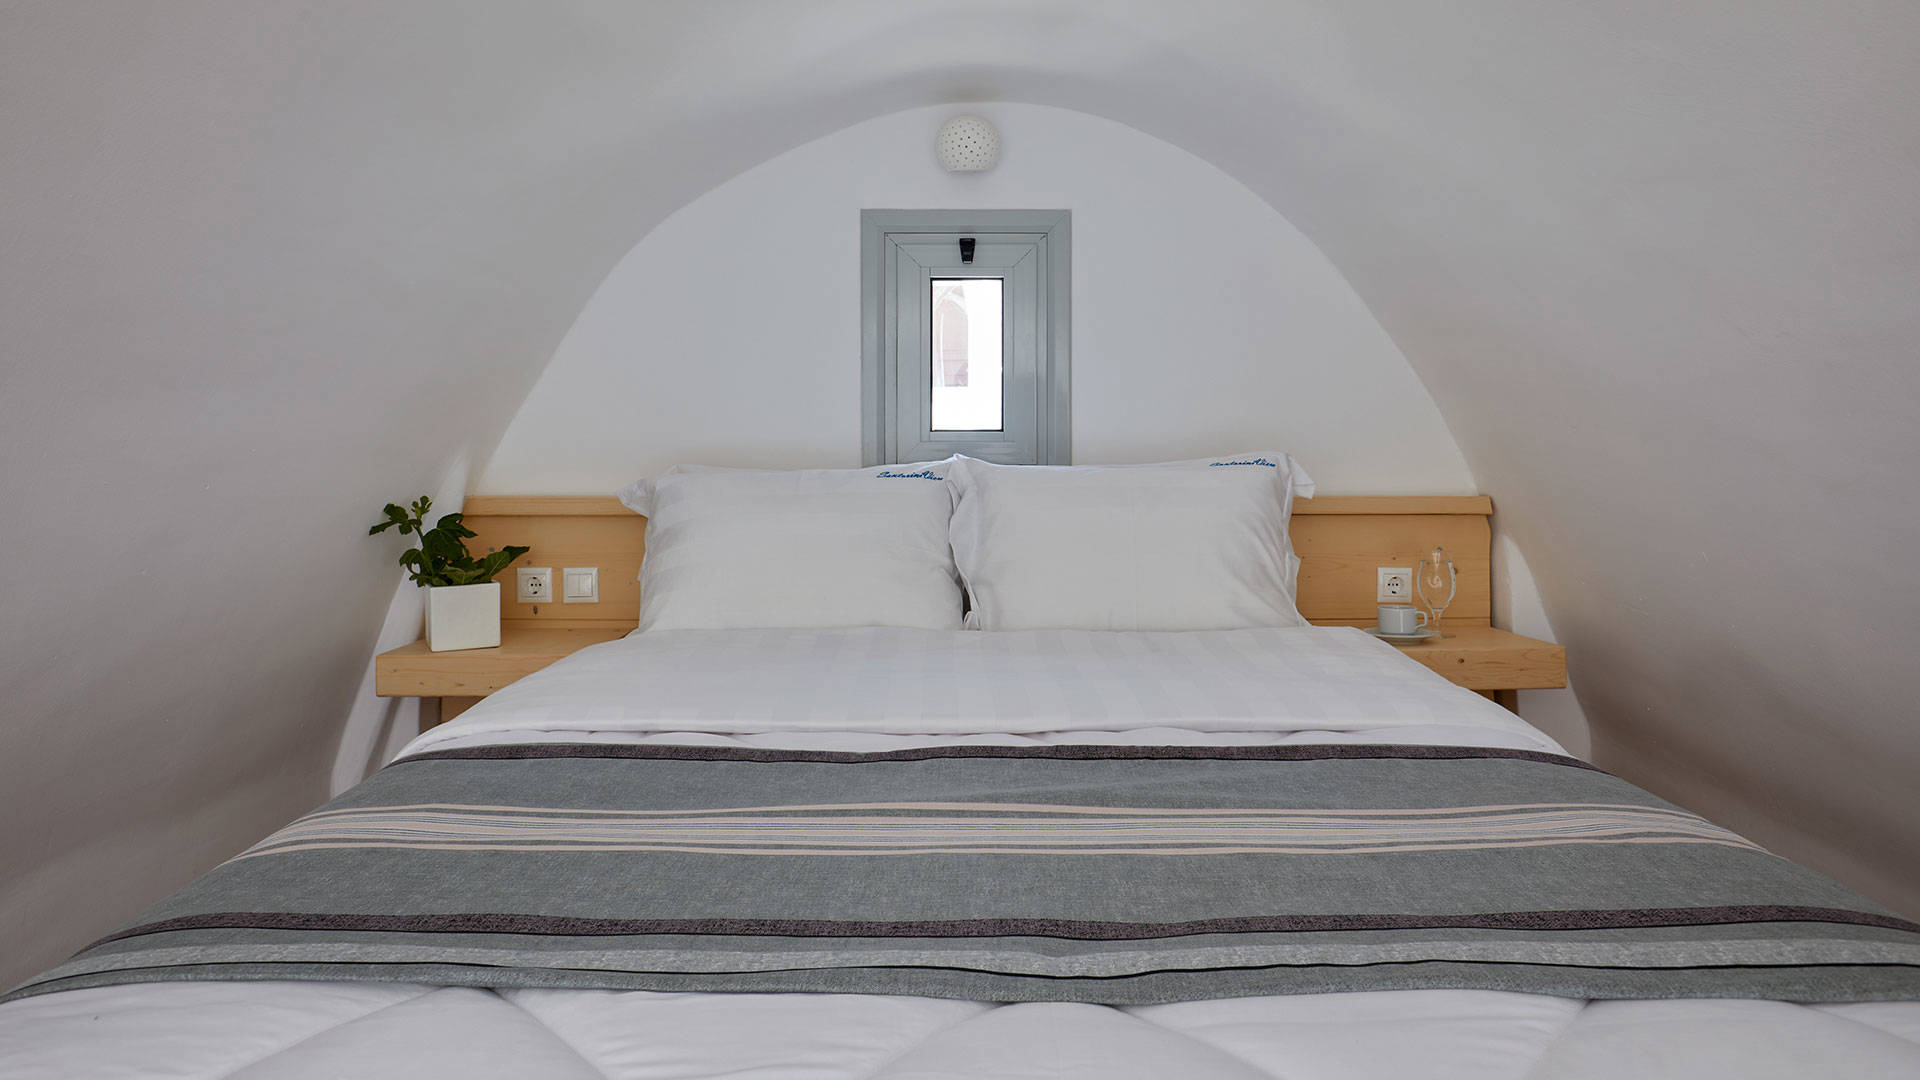 
Santorini View Hotel king size bed with white and grey linen, and window